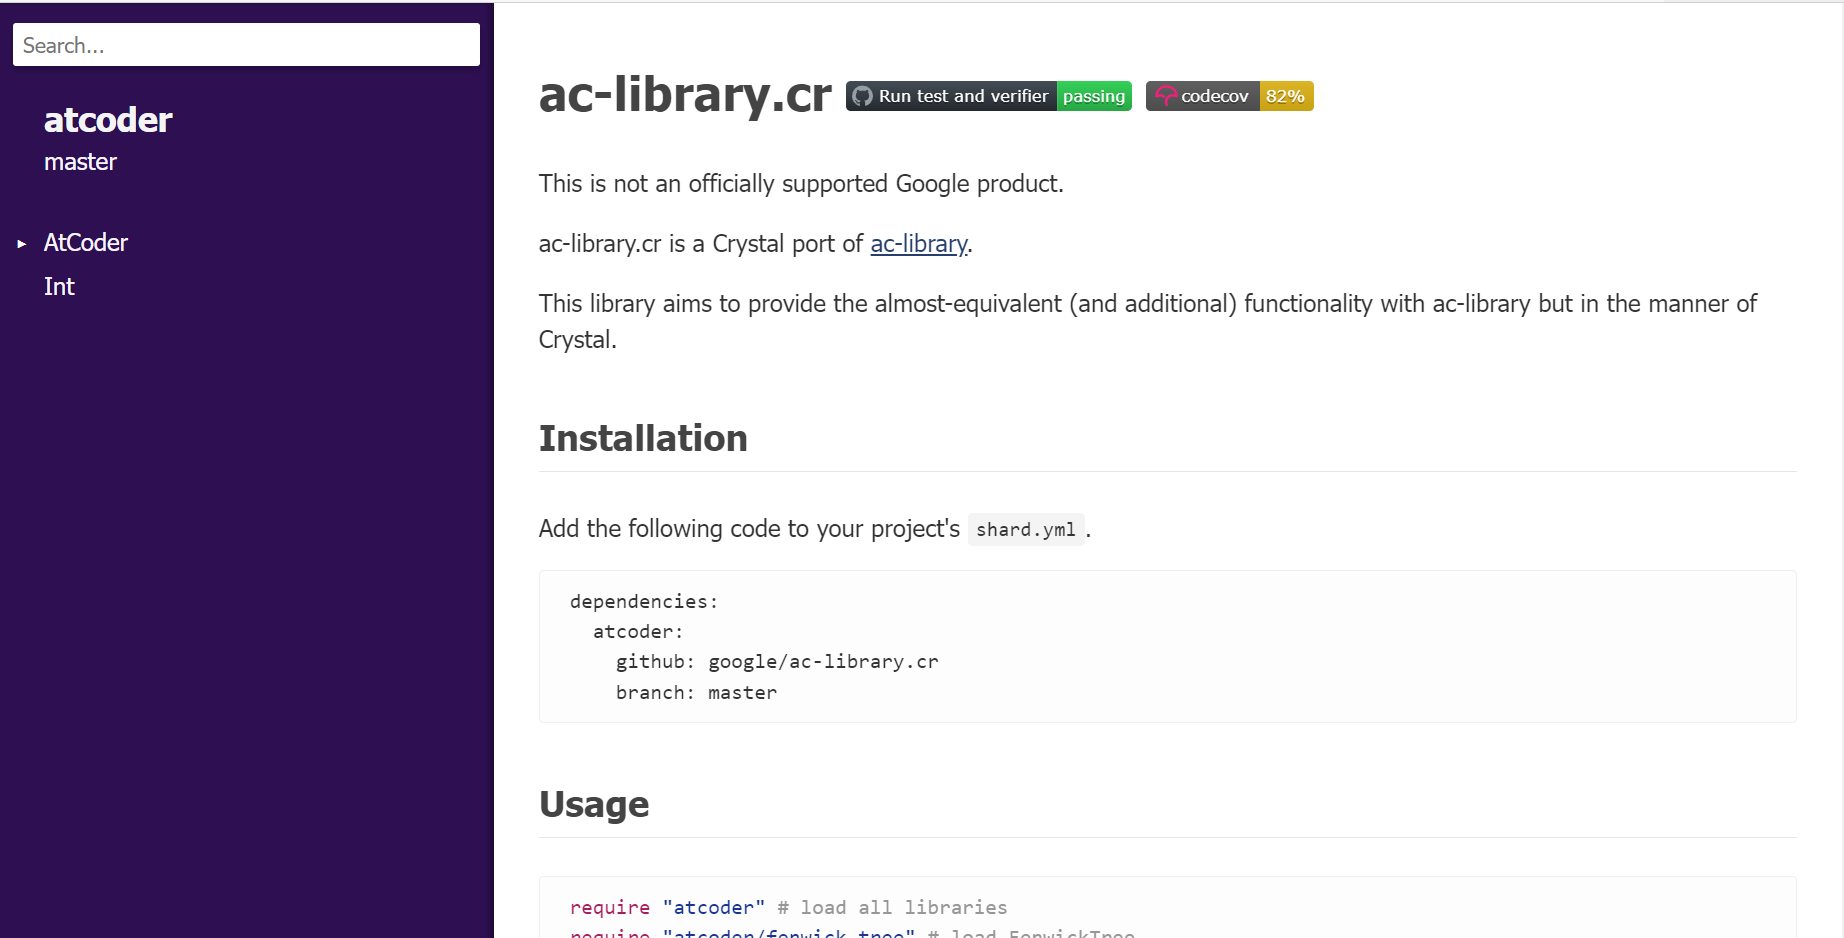 ac-library.cr